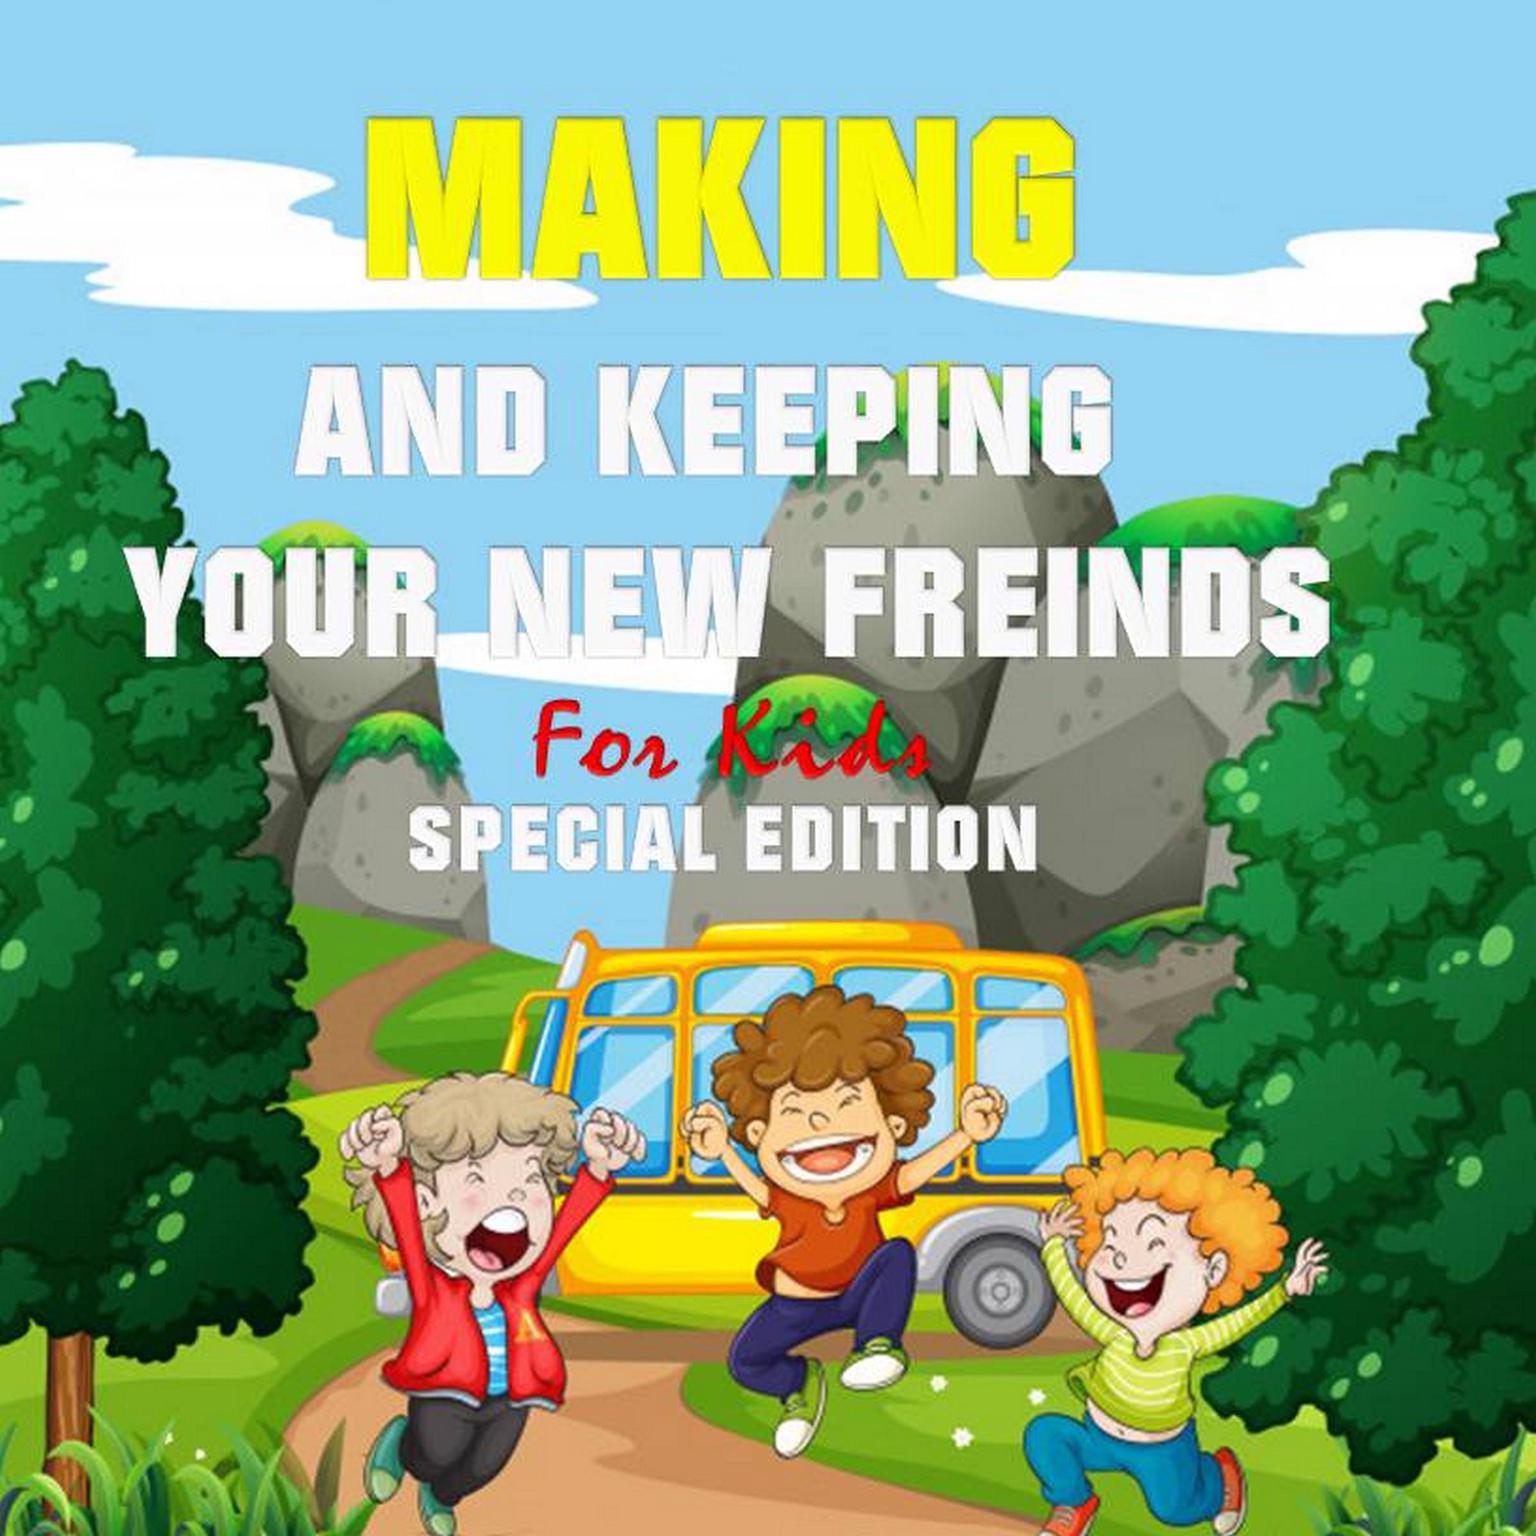 Making and Keeping Your New Friends, for Kids (Special Edition) Audiobook, by Tony R. Smith